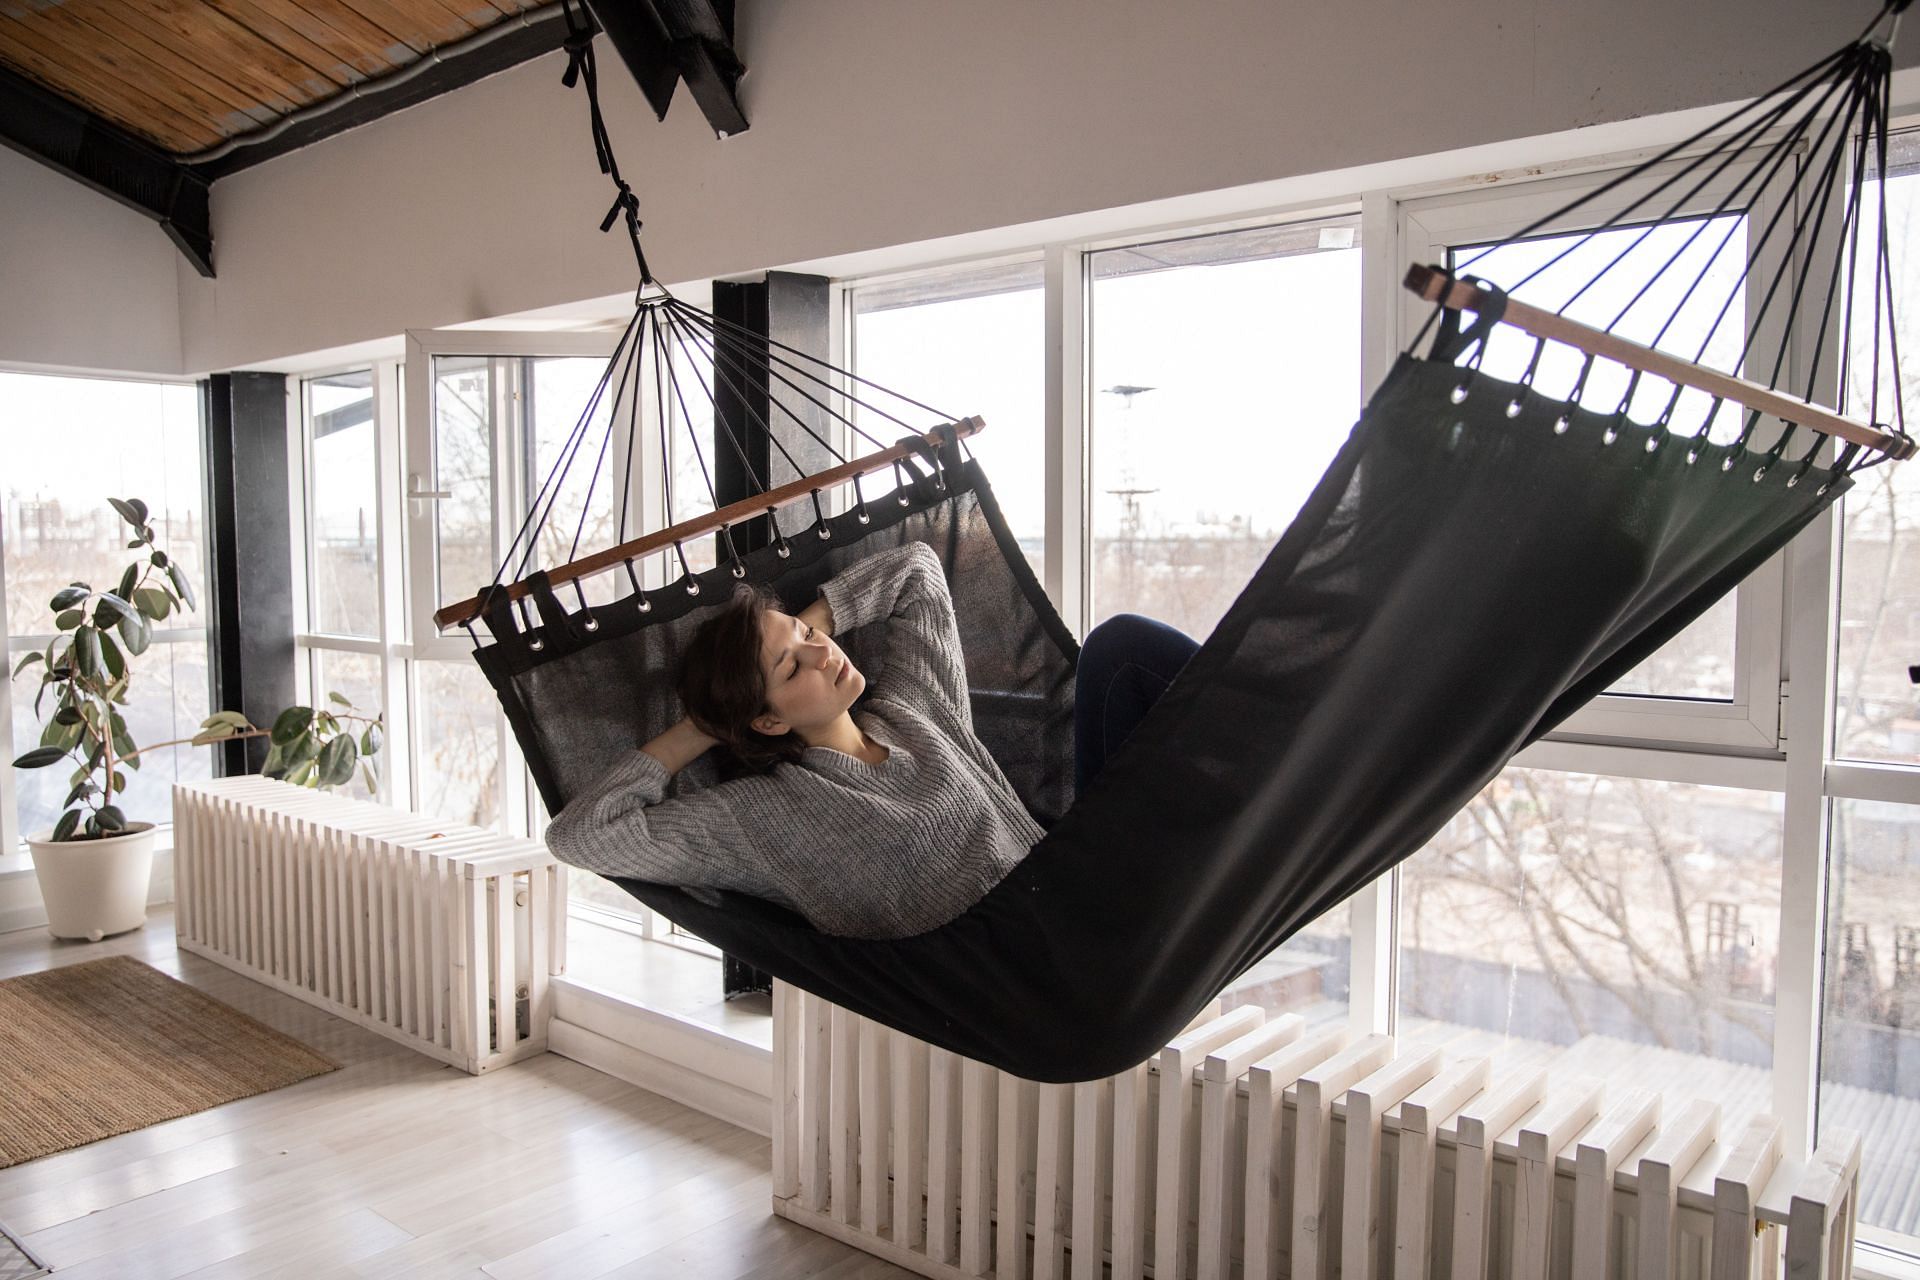 Keeping your environment cozy and cool can help you to get a good sleep. (Image via Pexels / Ekaterina Bolovtsova)